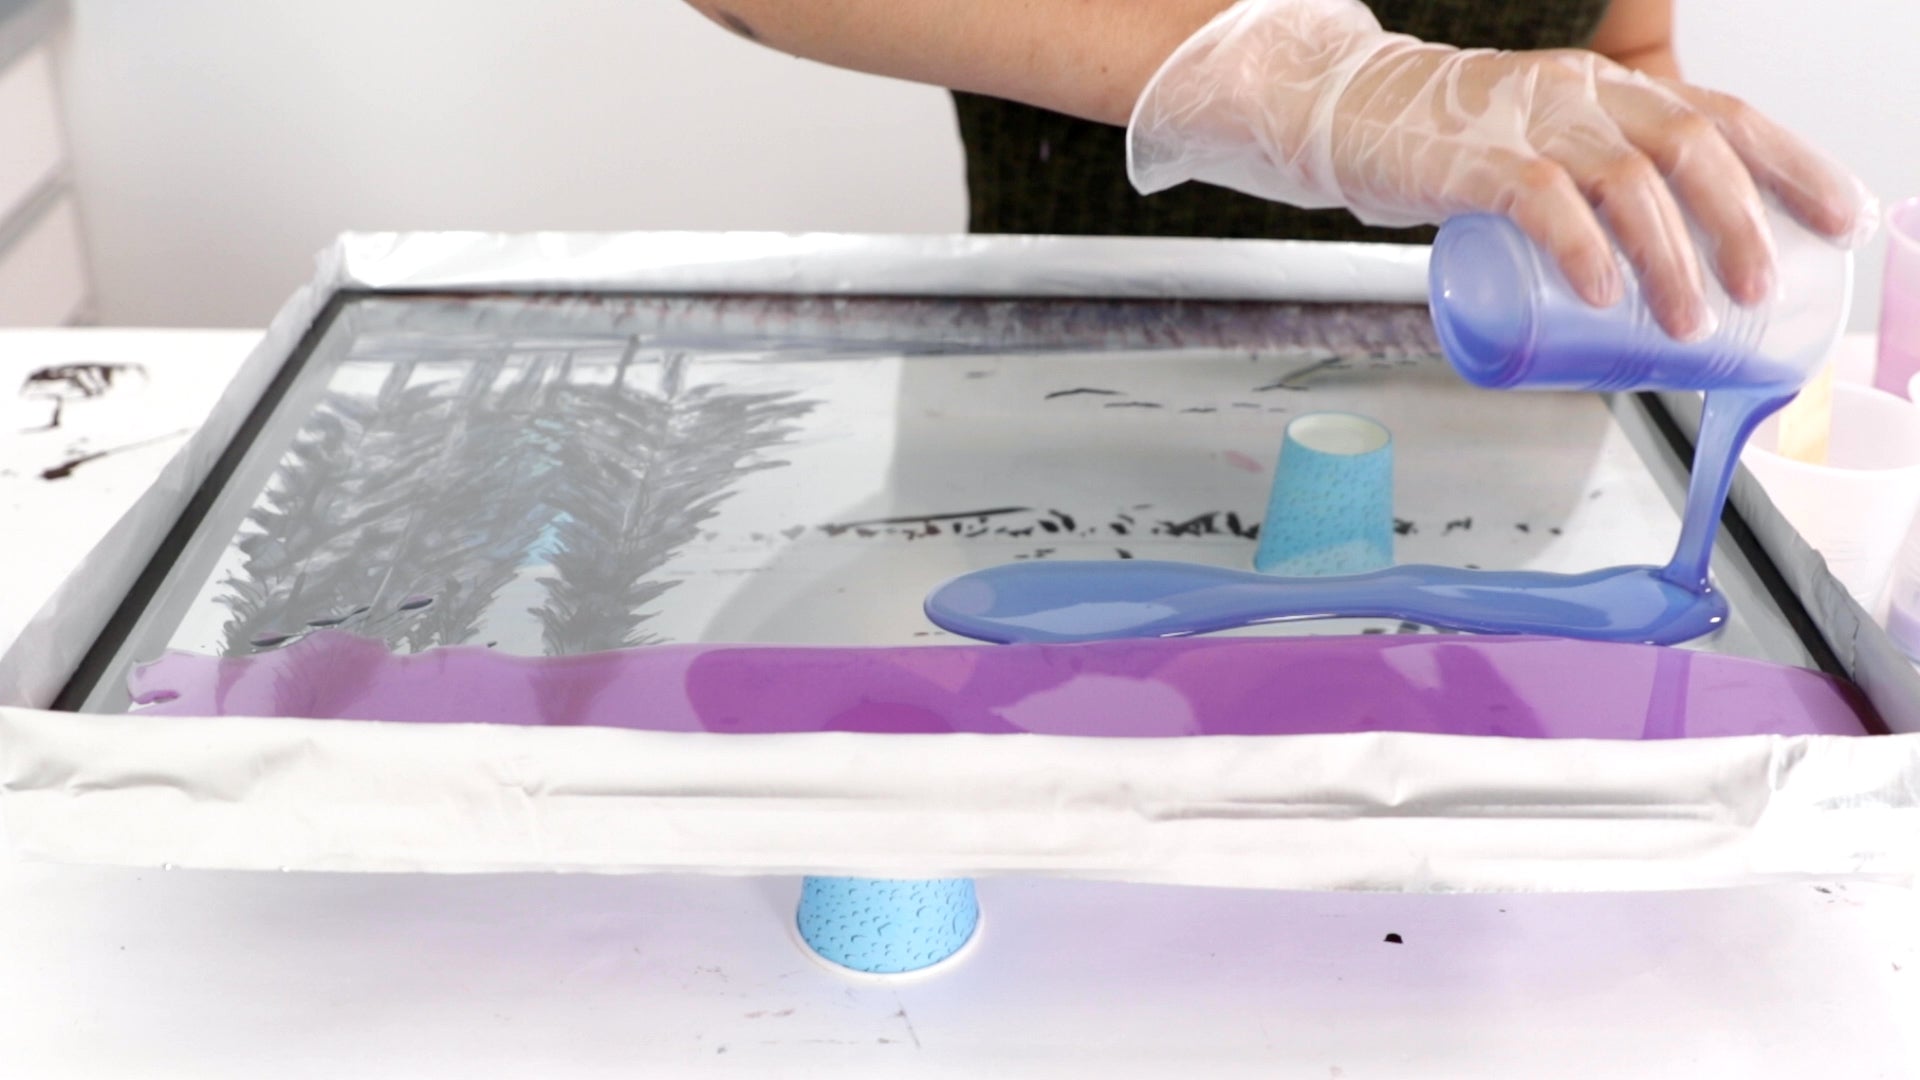 Resin Window Painting - Pour your resin layers, color by color